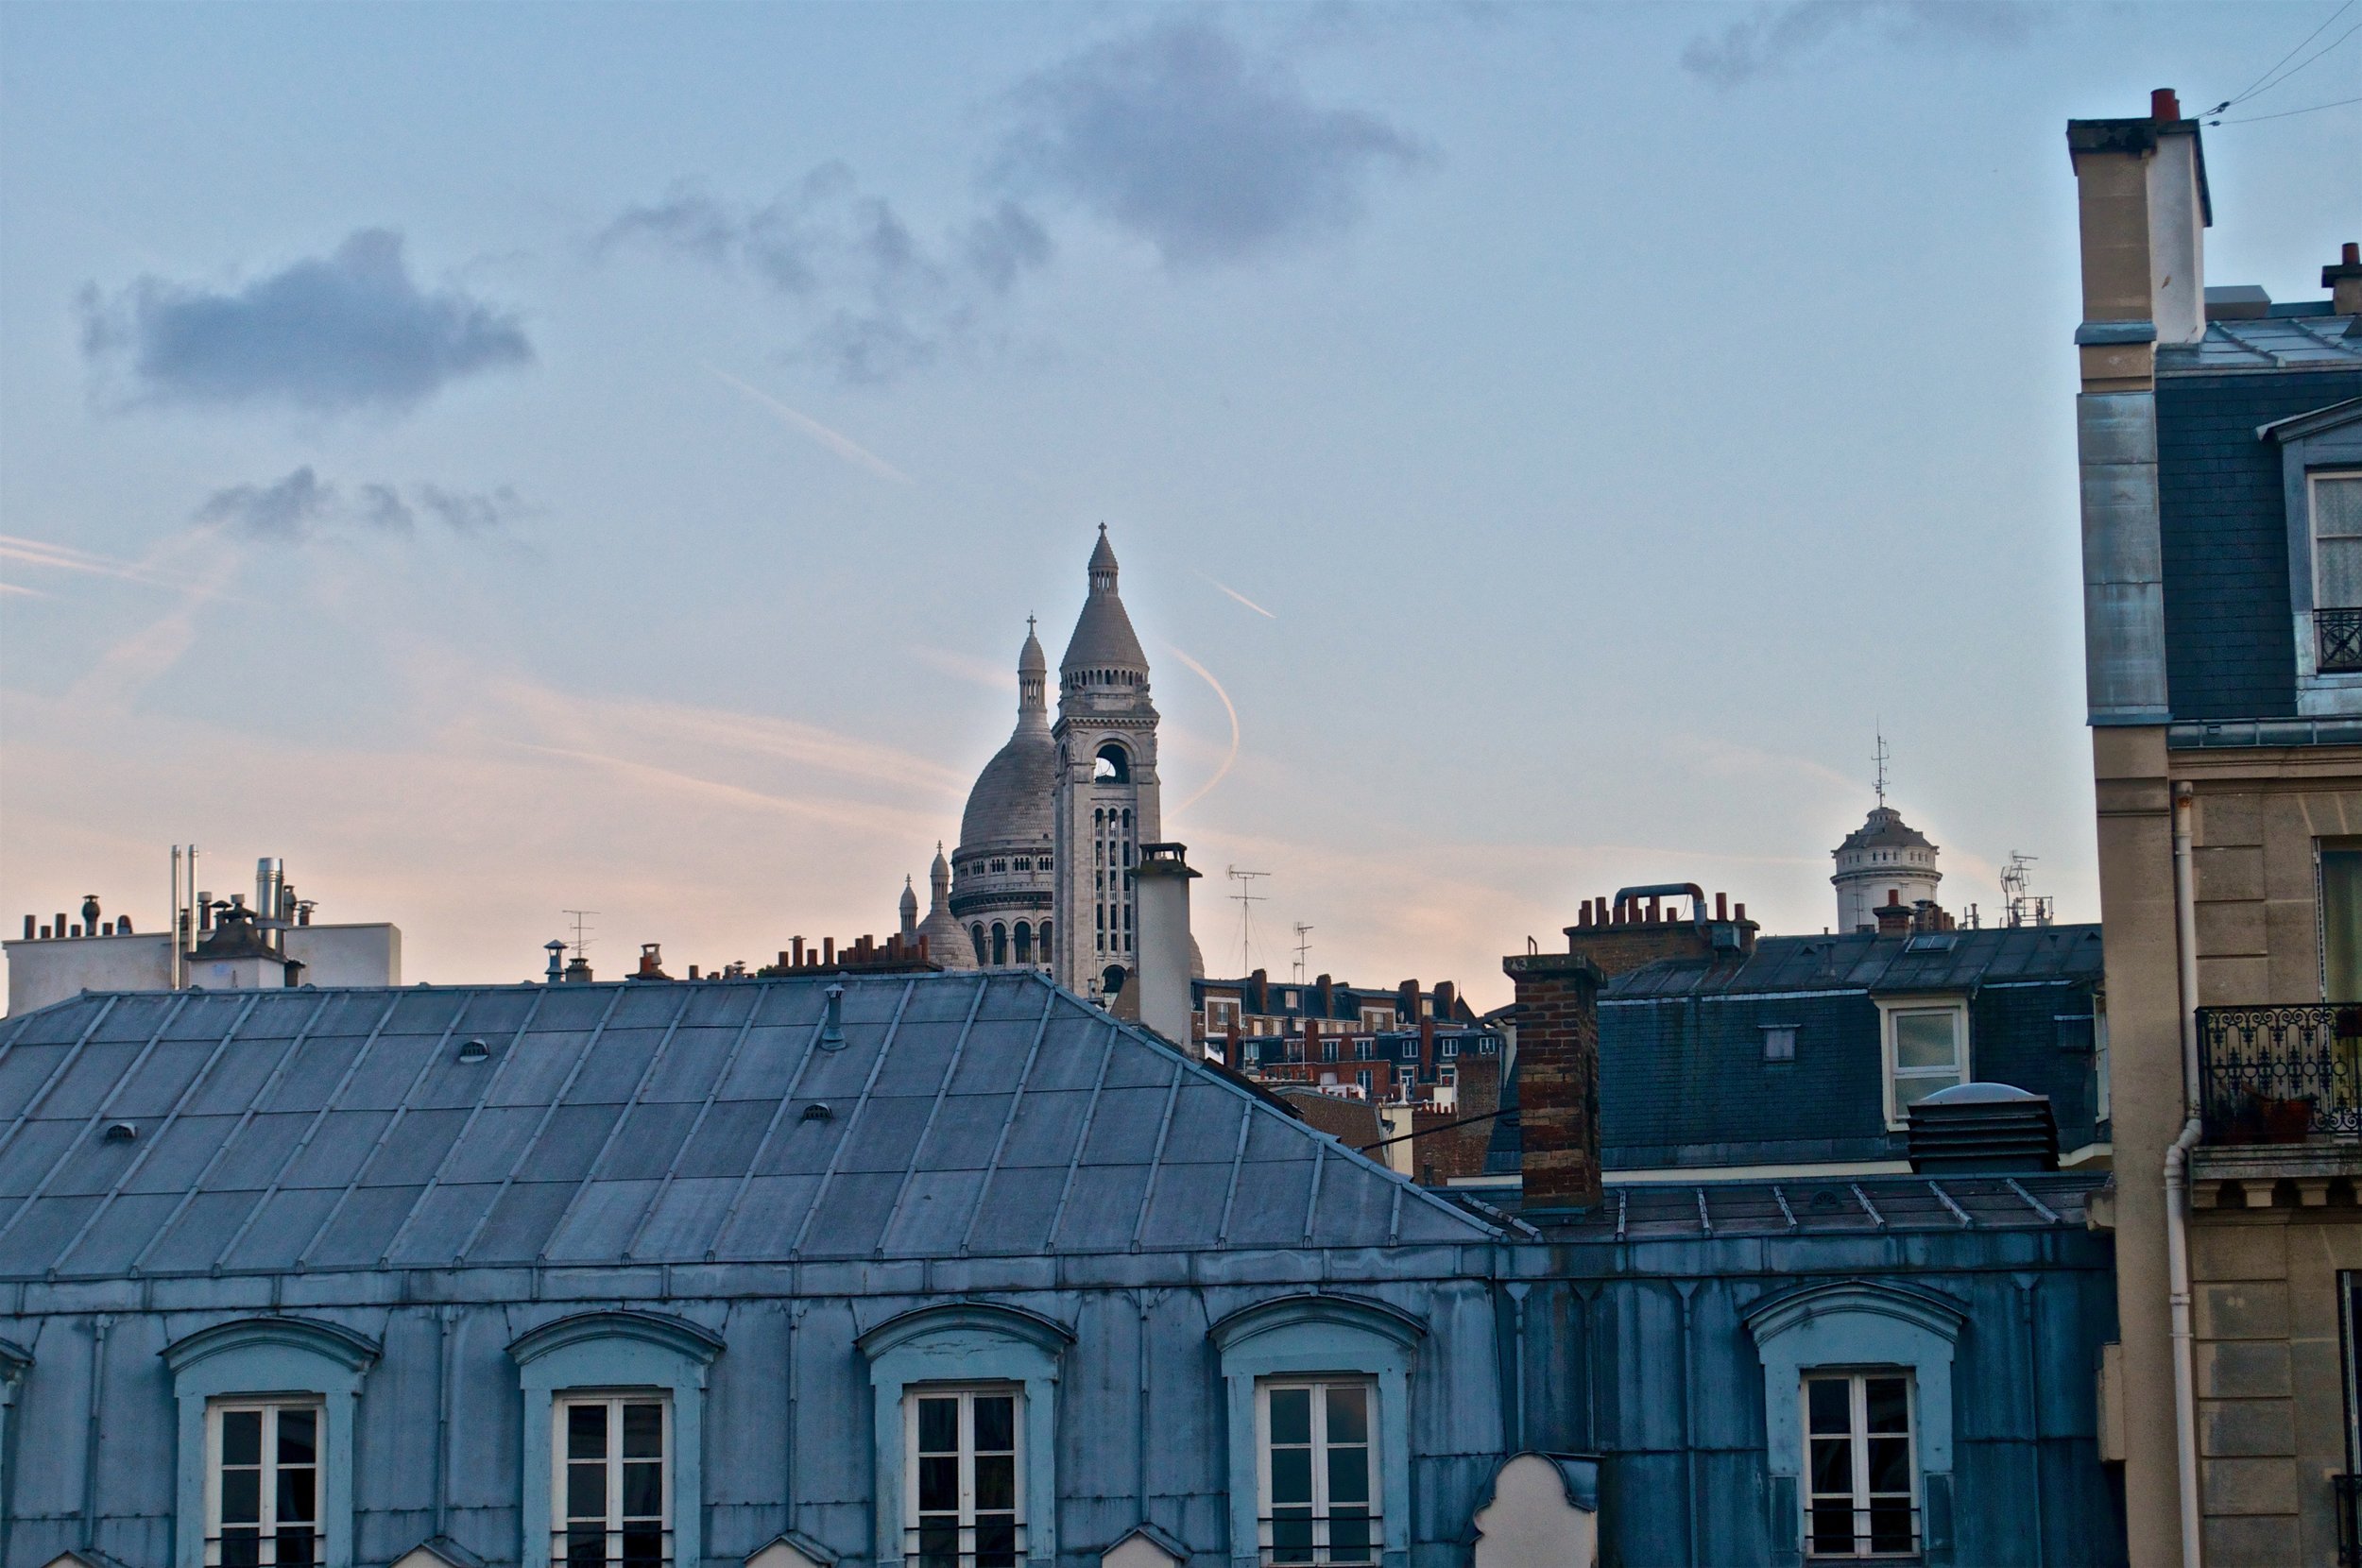 The View of Sacre Coeur and Montmartre from our Airbnb